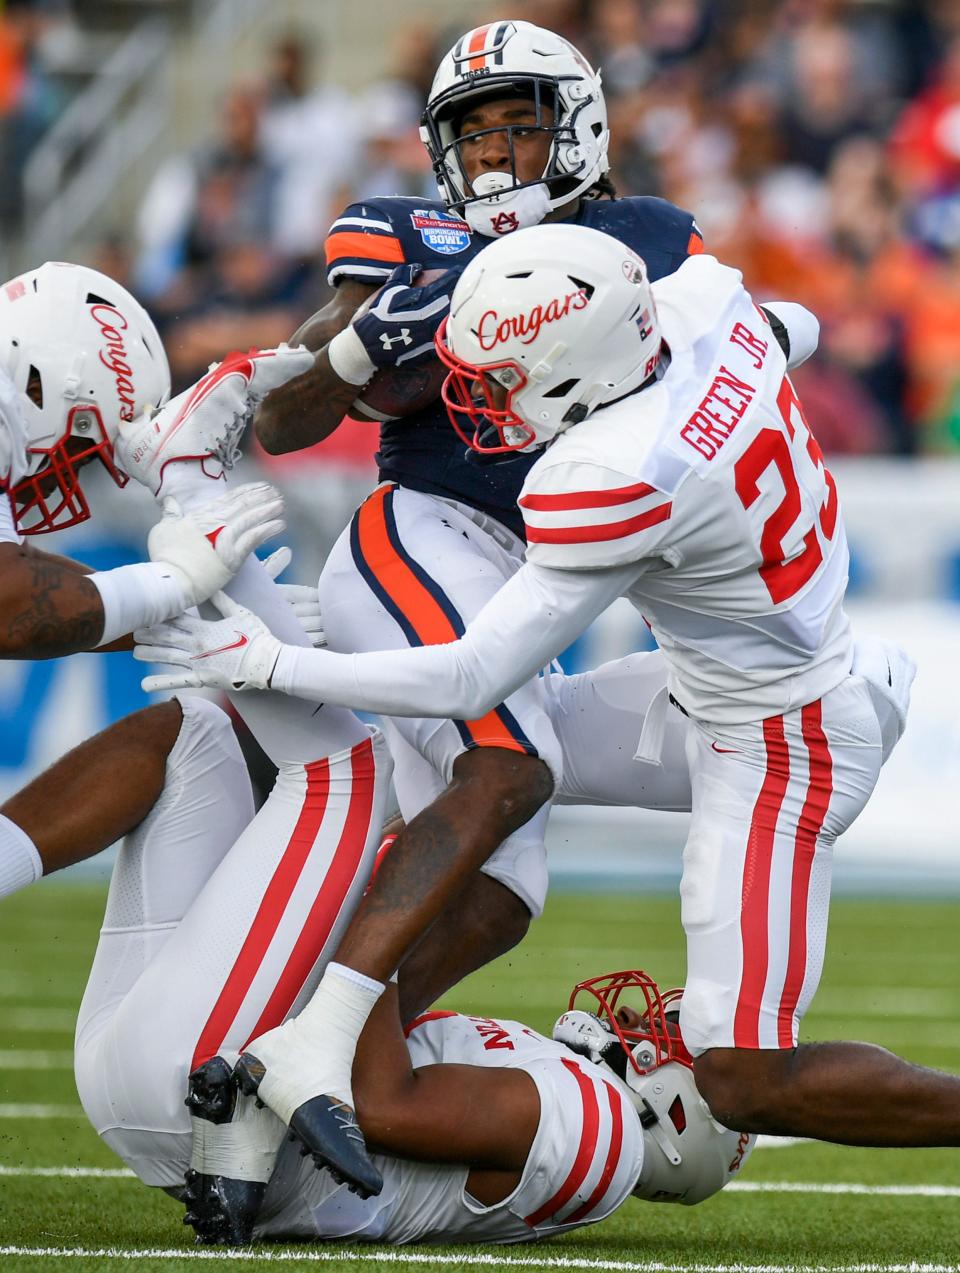 Auburn Tigers running back Tank Bigsby (4) is stopped by Houston linebacker Deontay Anderson (2) and cornerback Art Green (23) during the Birmingham Bowl at Protective Stadium in Birmingham, Ala., on Tuesday December 28, 2021.